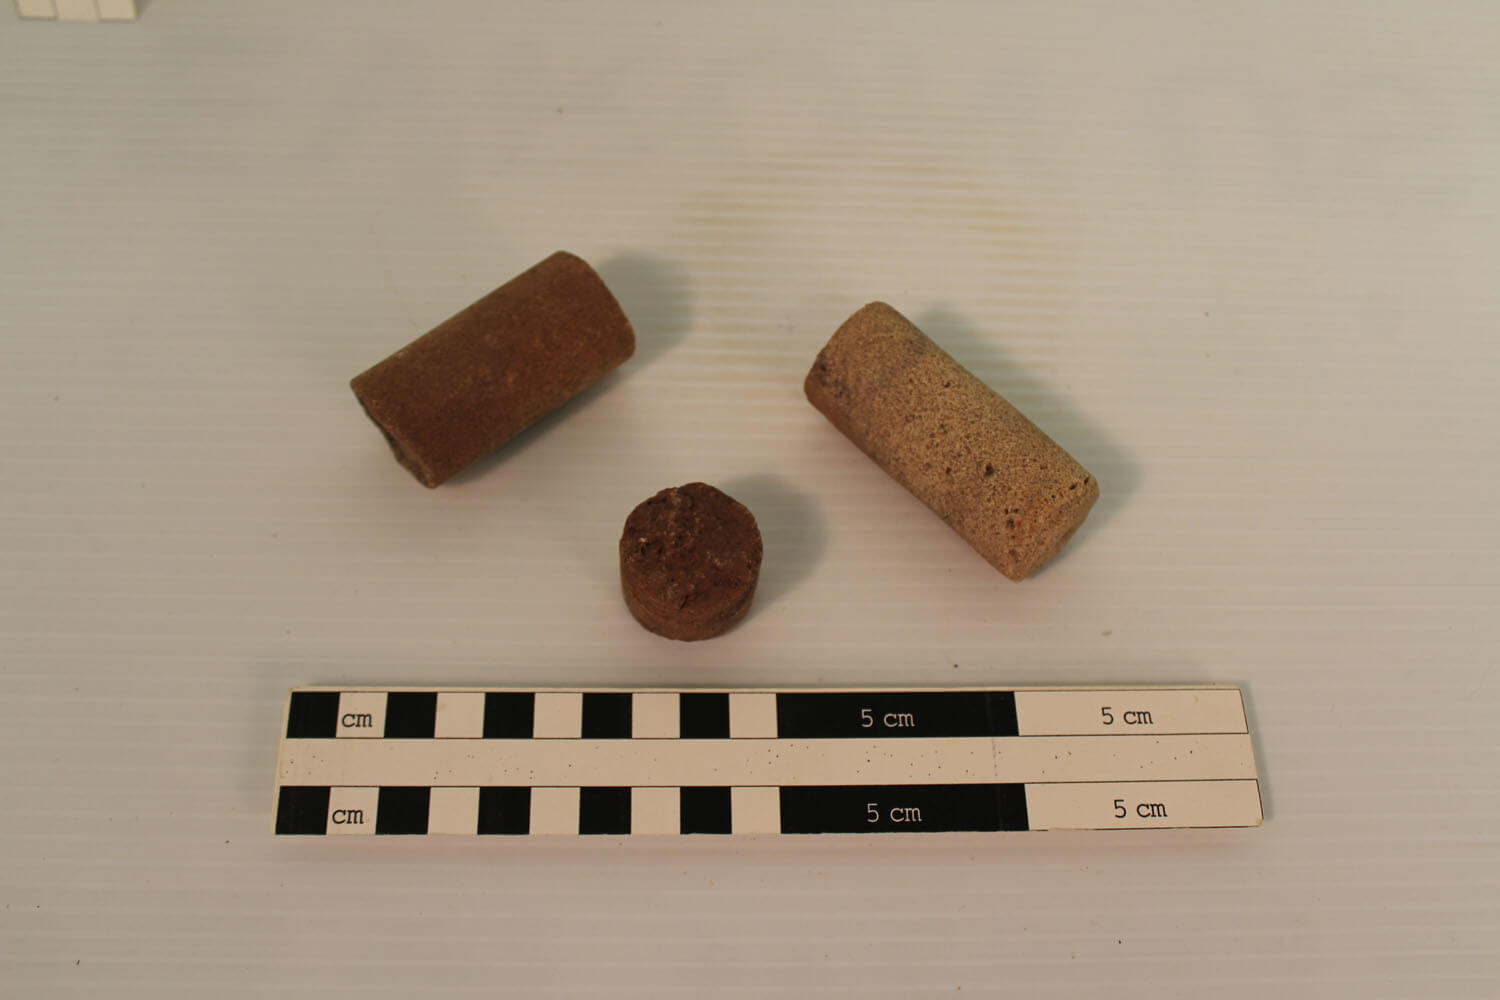 Sandstone core sample fragments from the Calamity Camp. BLM Collection.